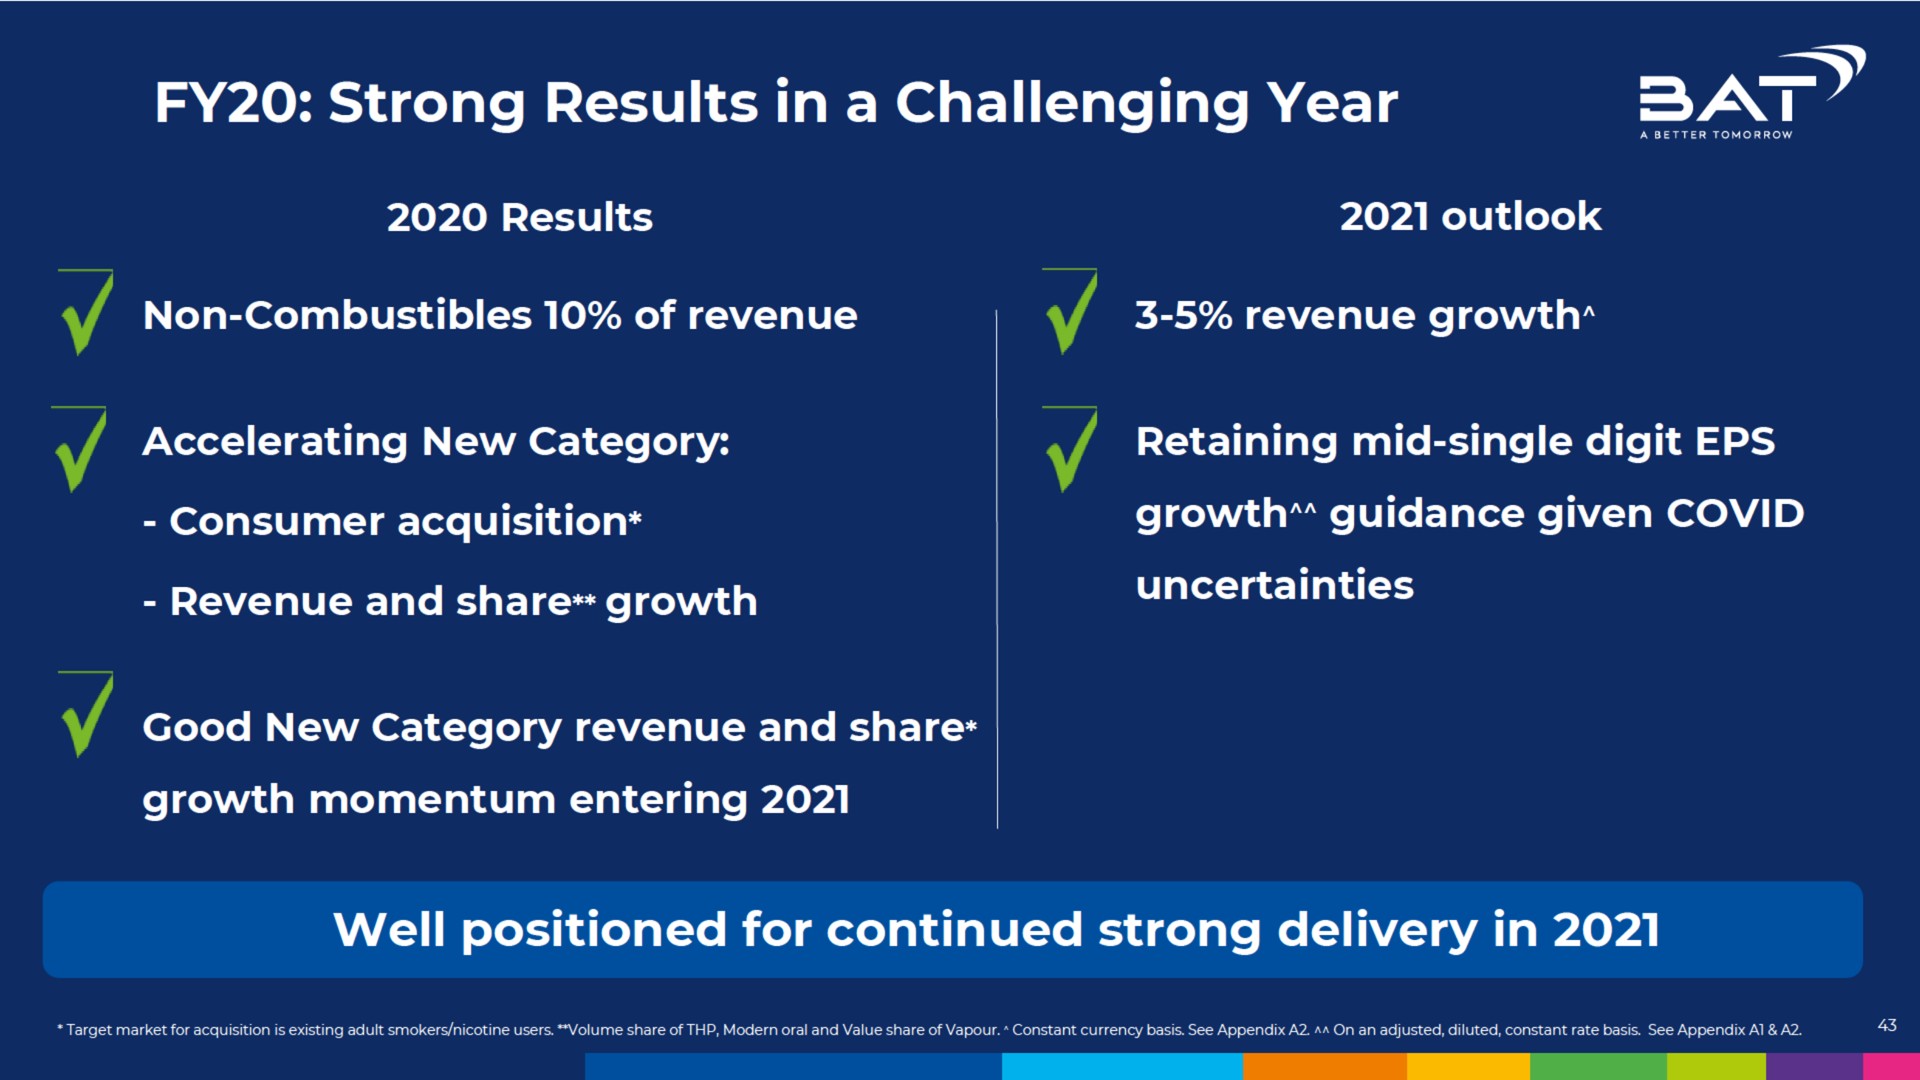 strong results in a challenging year | BAT